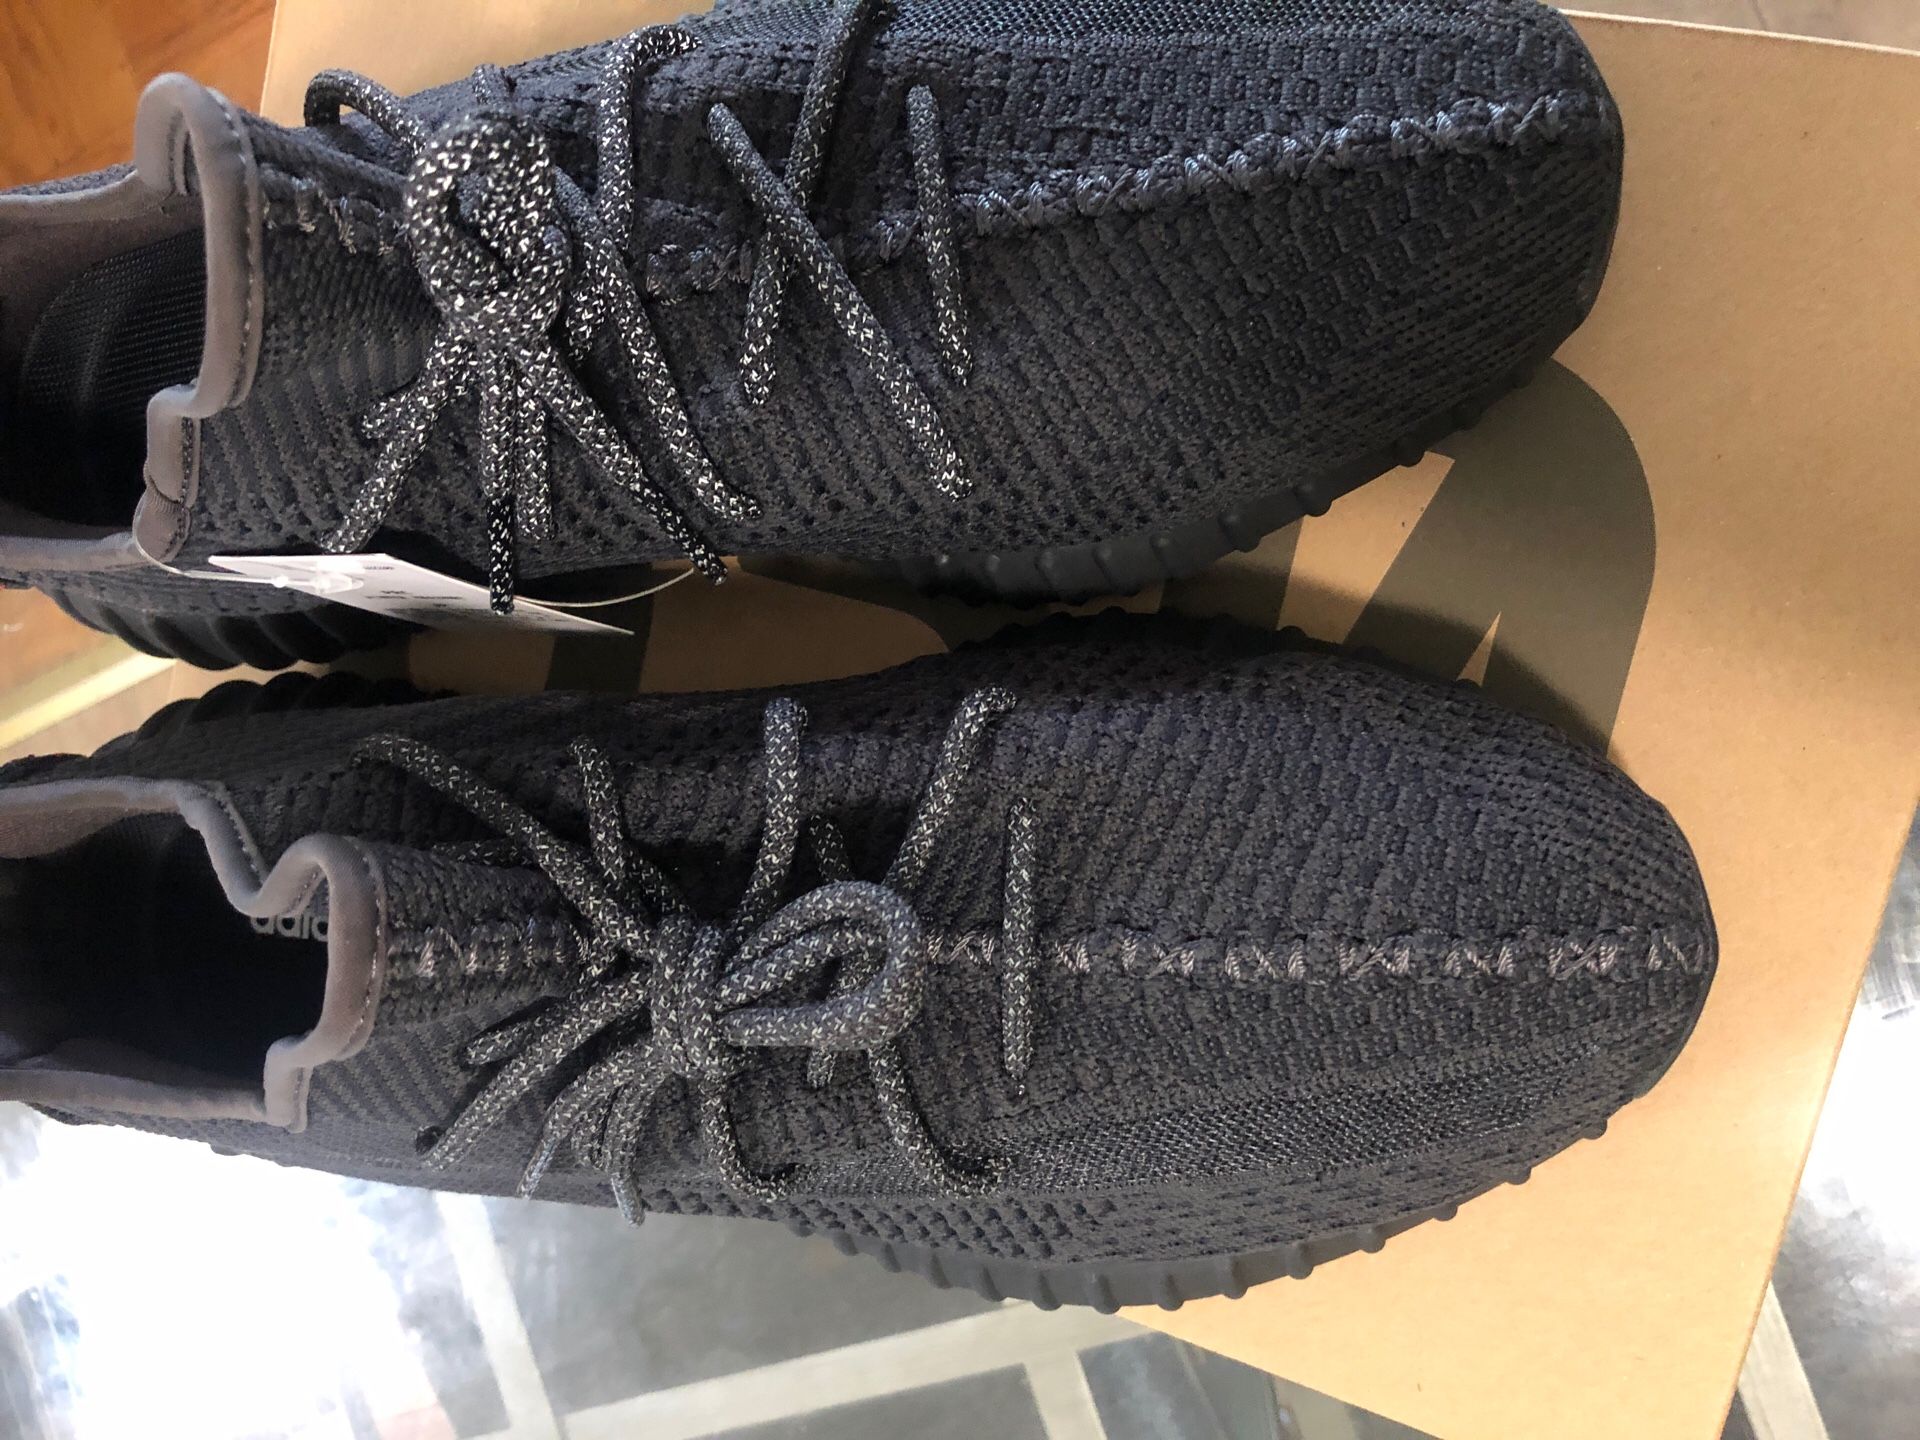 YEEZY BOOST 350 V2 BLACK (NON-REFLECT) 2 pairs in stock!